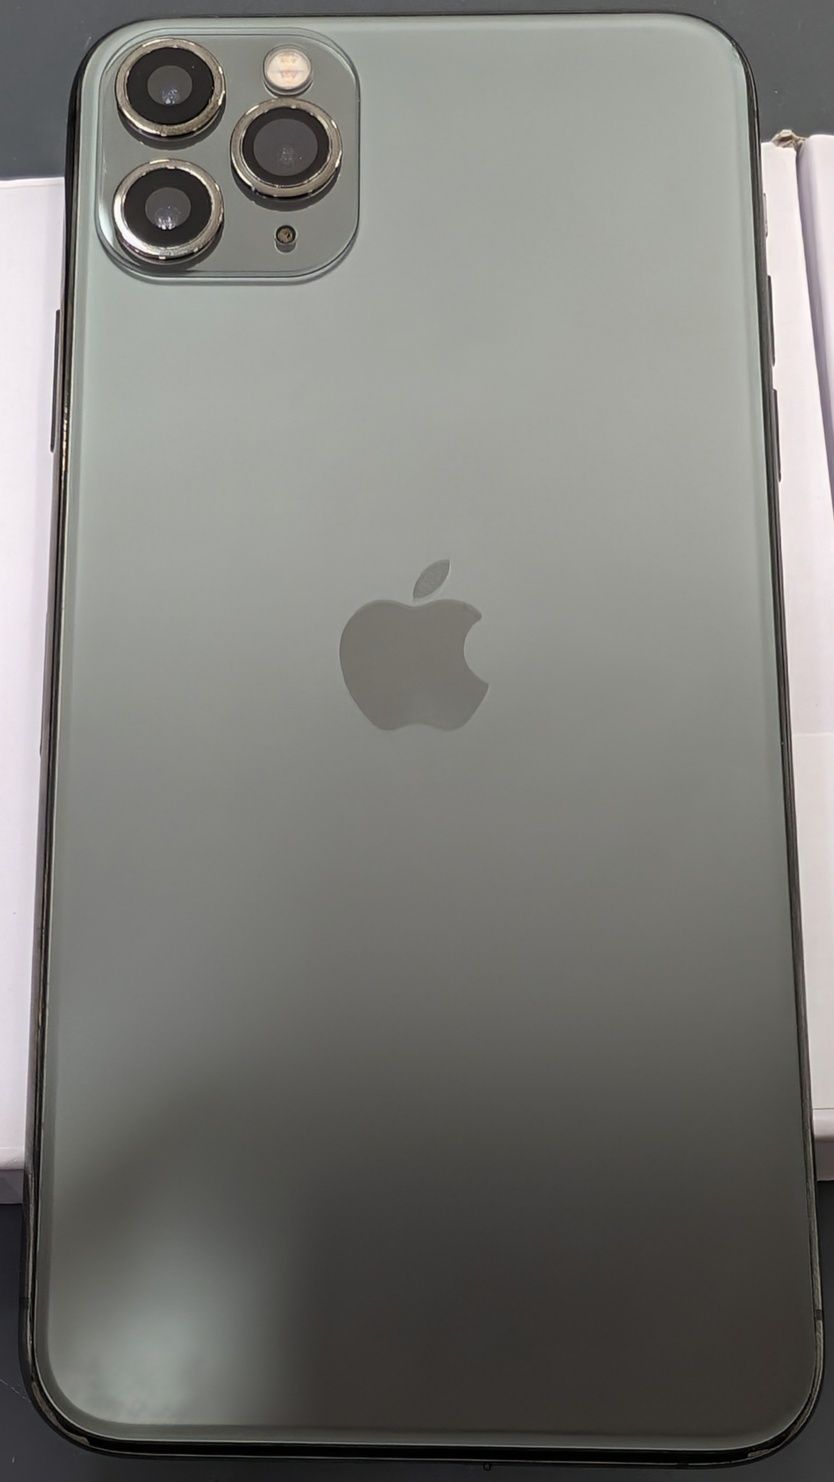 iPhone 11 Pro Max 256GB Space Grey